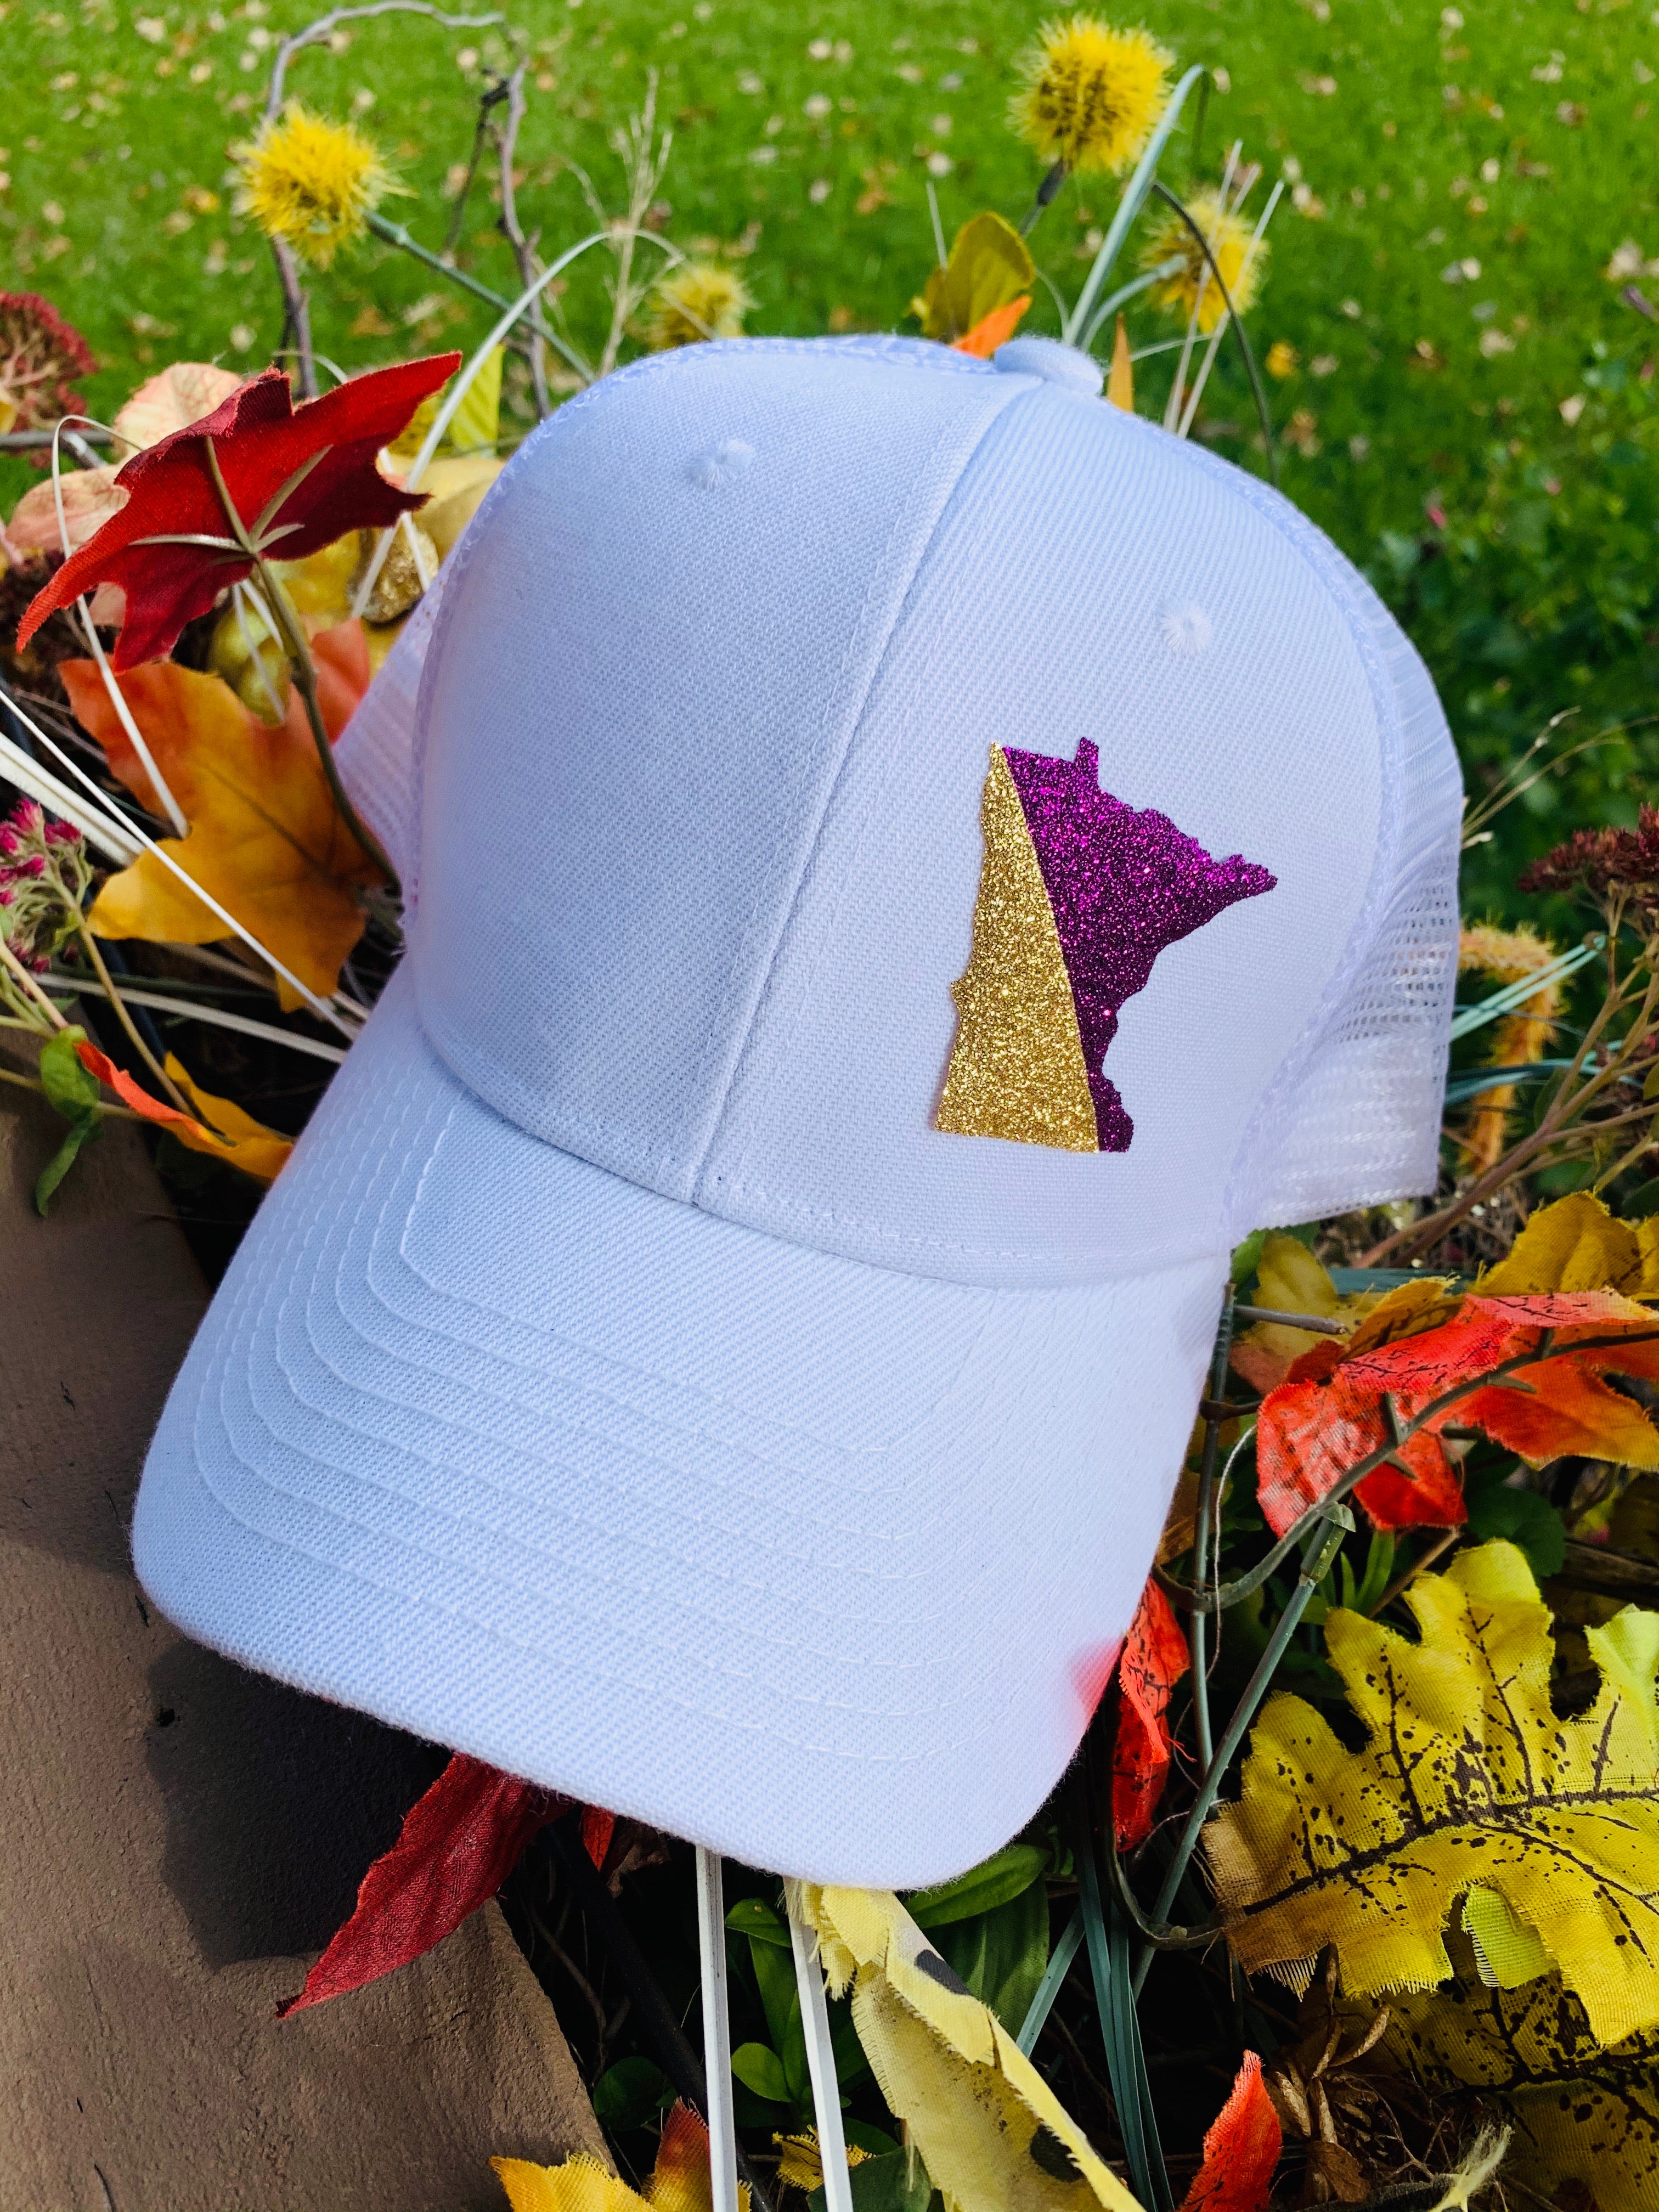 Hats { Minnesota Vikings } White Structured Hat with Mesh Back and Purple and Gold Glitter State of Minnesota. Adjustable Snap Back Cap. Unisex.